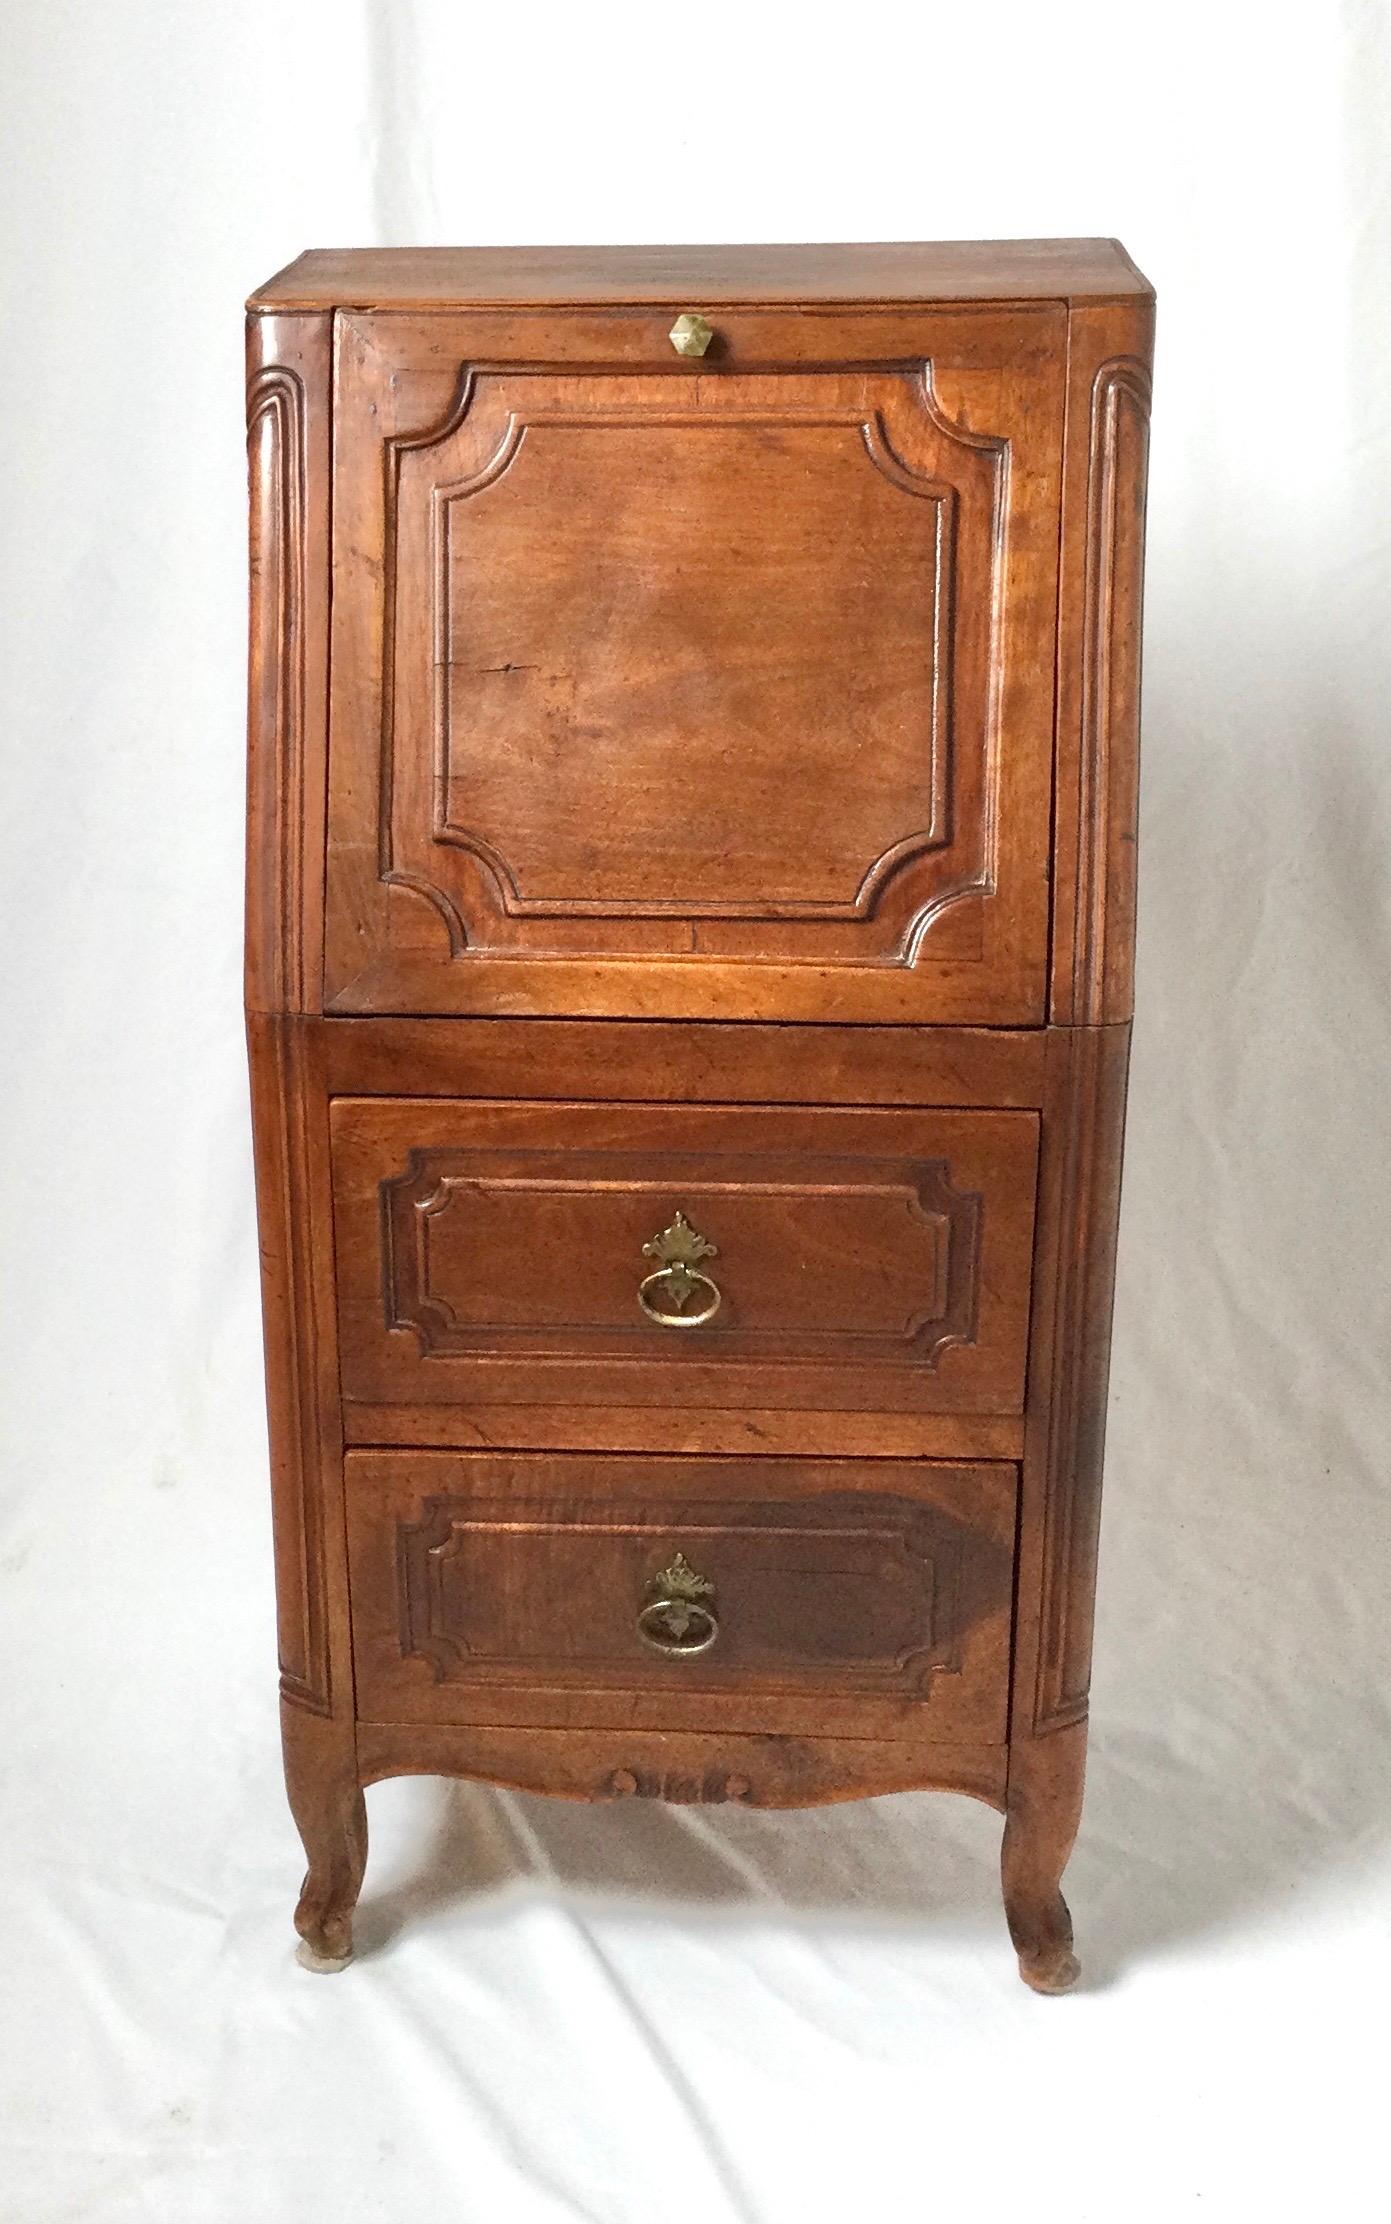 Diminutive Italian two-drawer drop front cabinet. Measures: 29